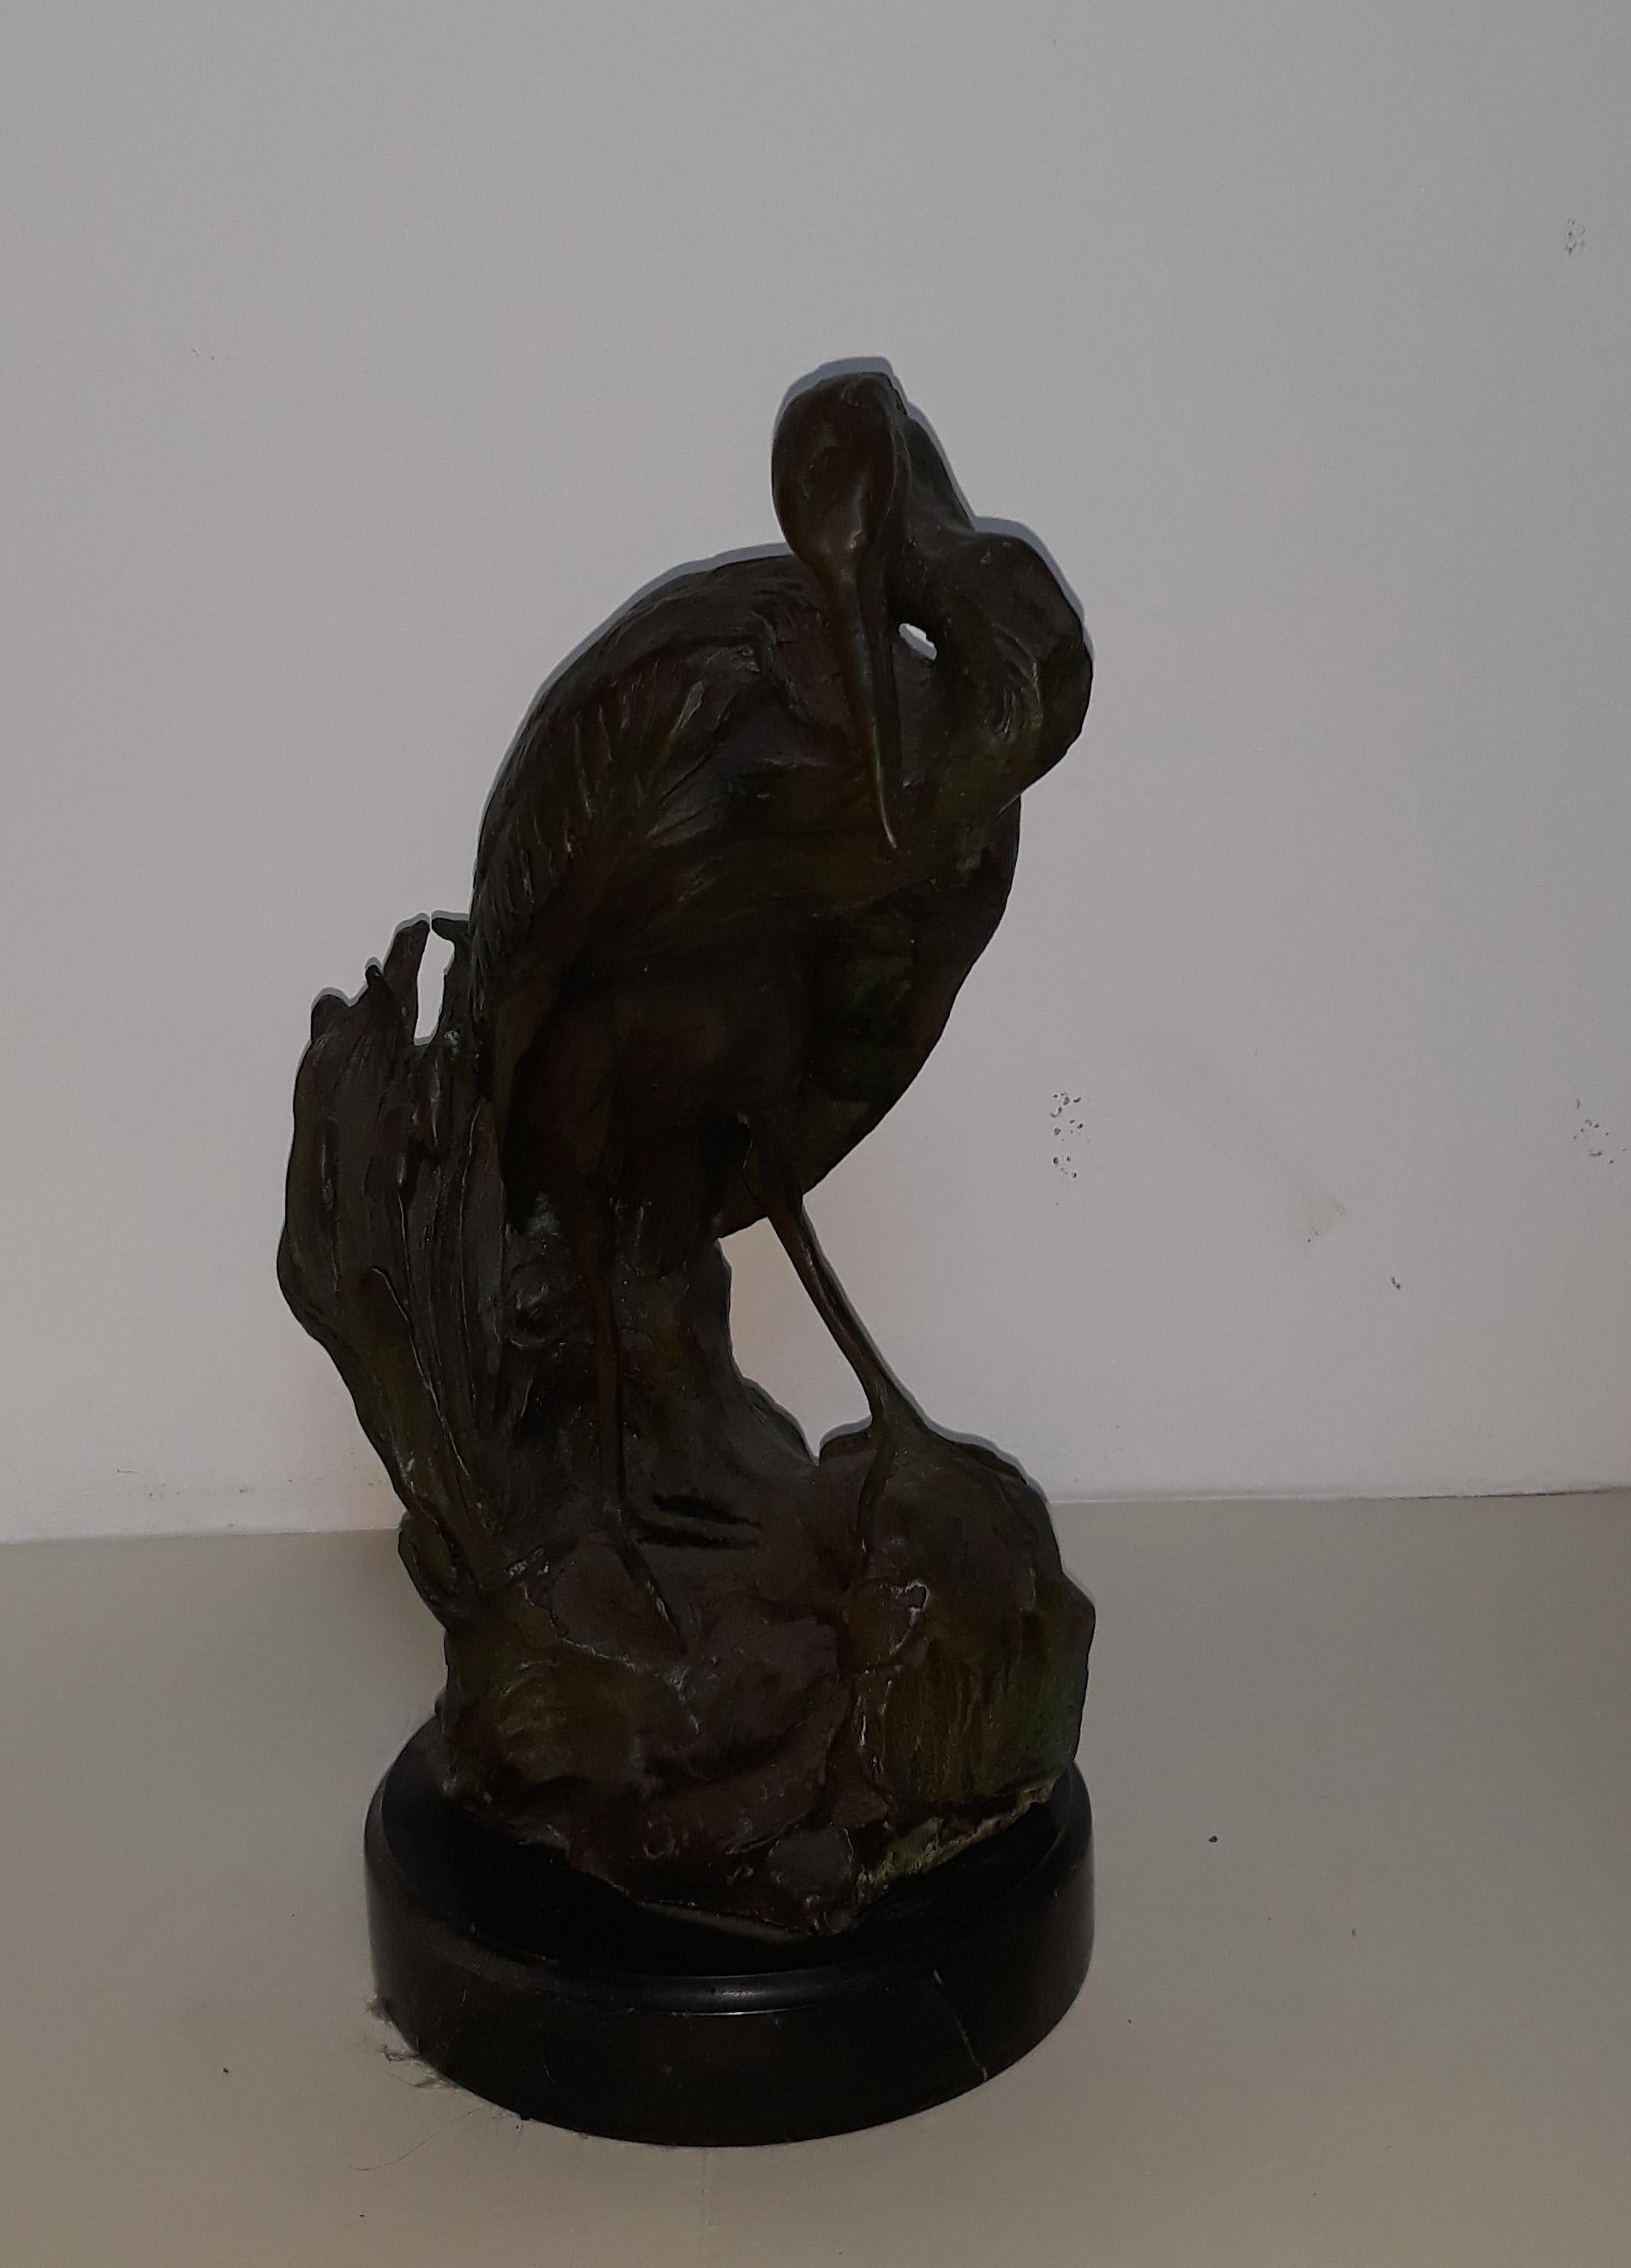 Pair of 20th century lost wax bronze gray herons, Italy Naples, 1930
1 right and 1 left, signed on base, black marble base.
Measurements:
Bigger heron: height cm 55, width cm 15, depth cm 30
Smaller heron: height cm 35, width cm 17, depth cm 17.